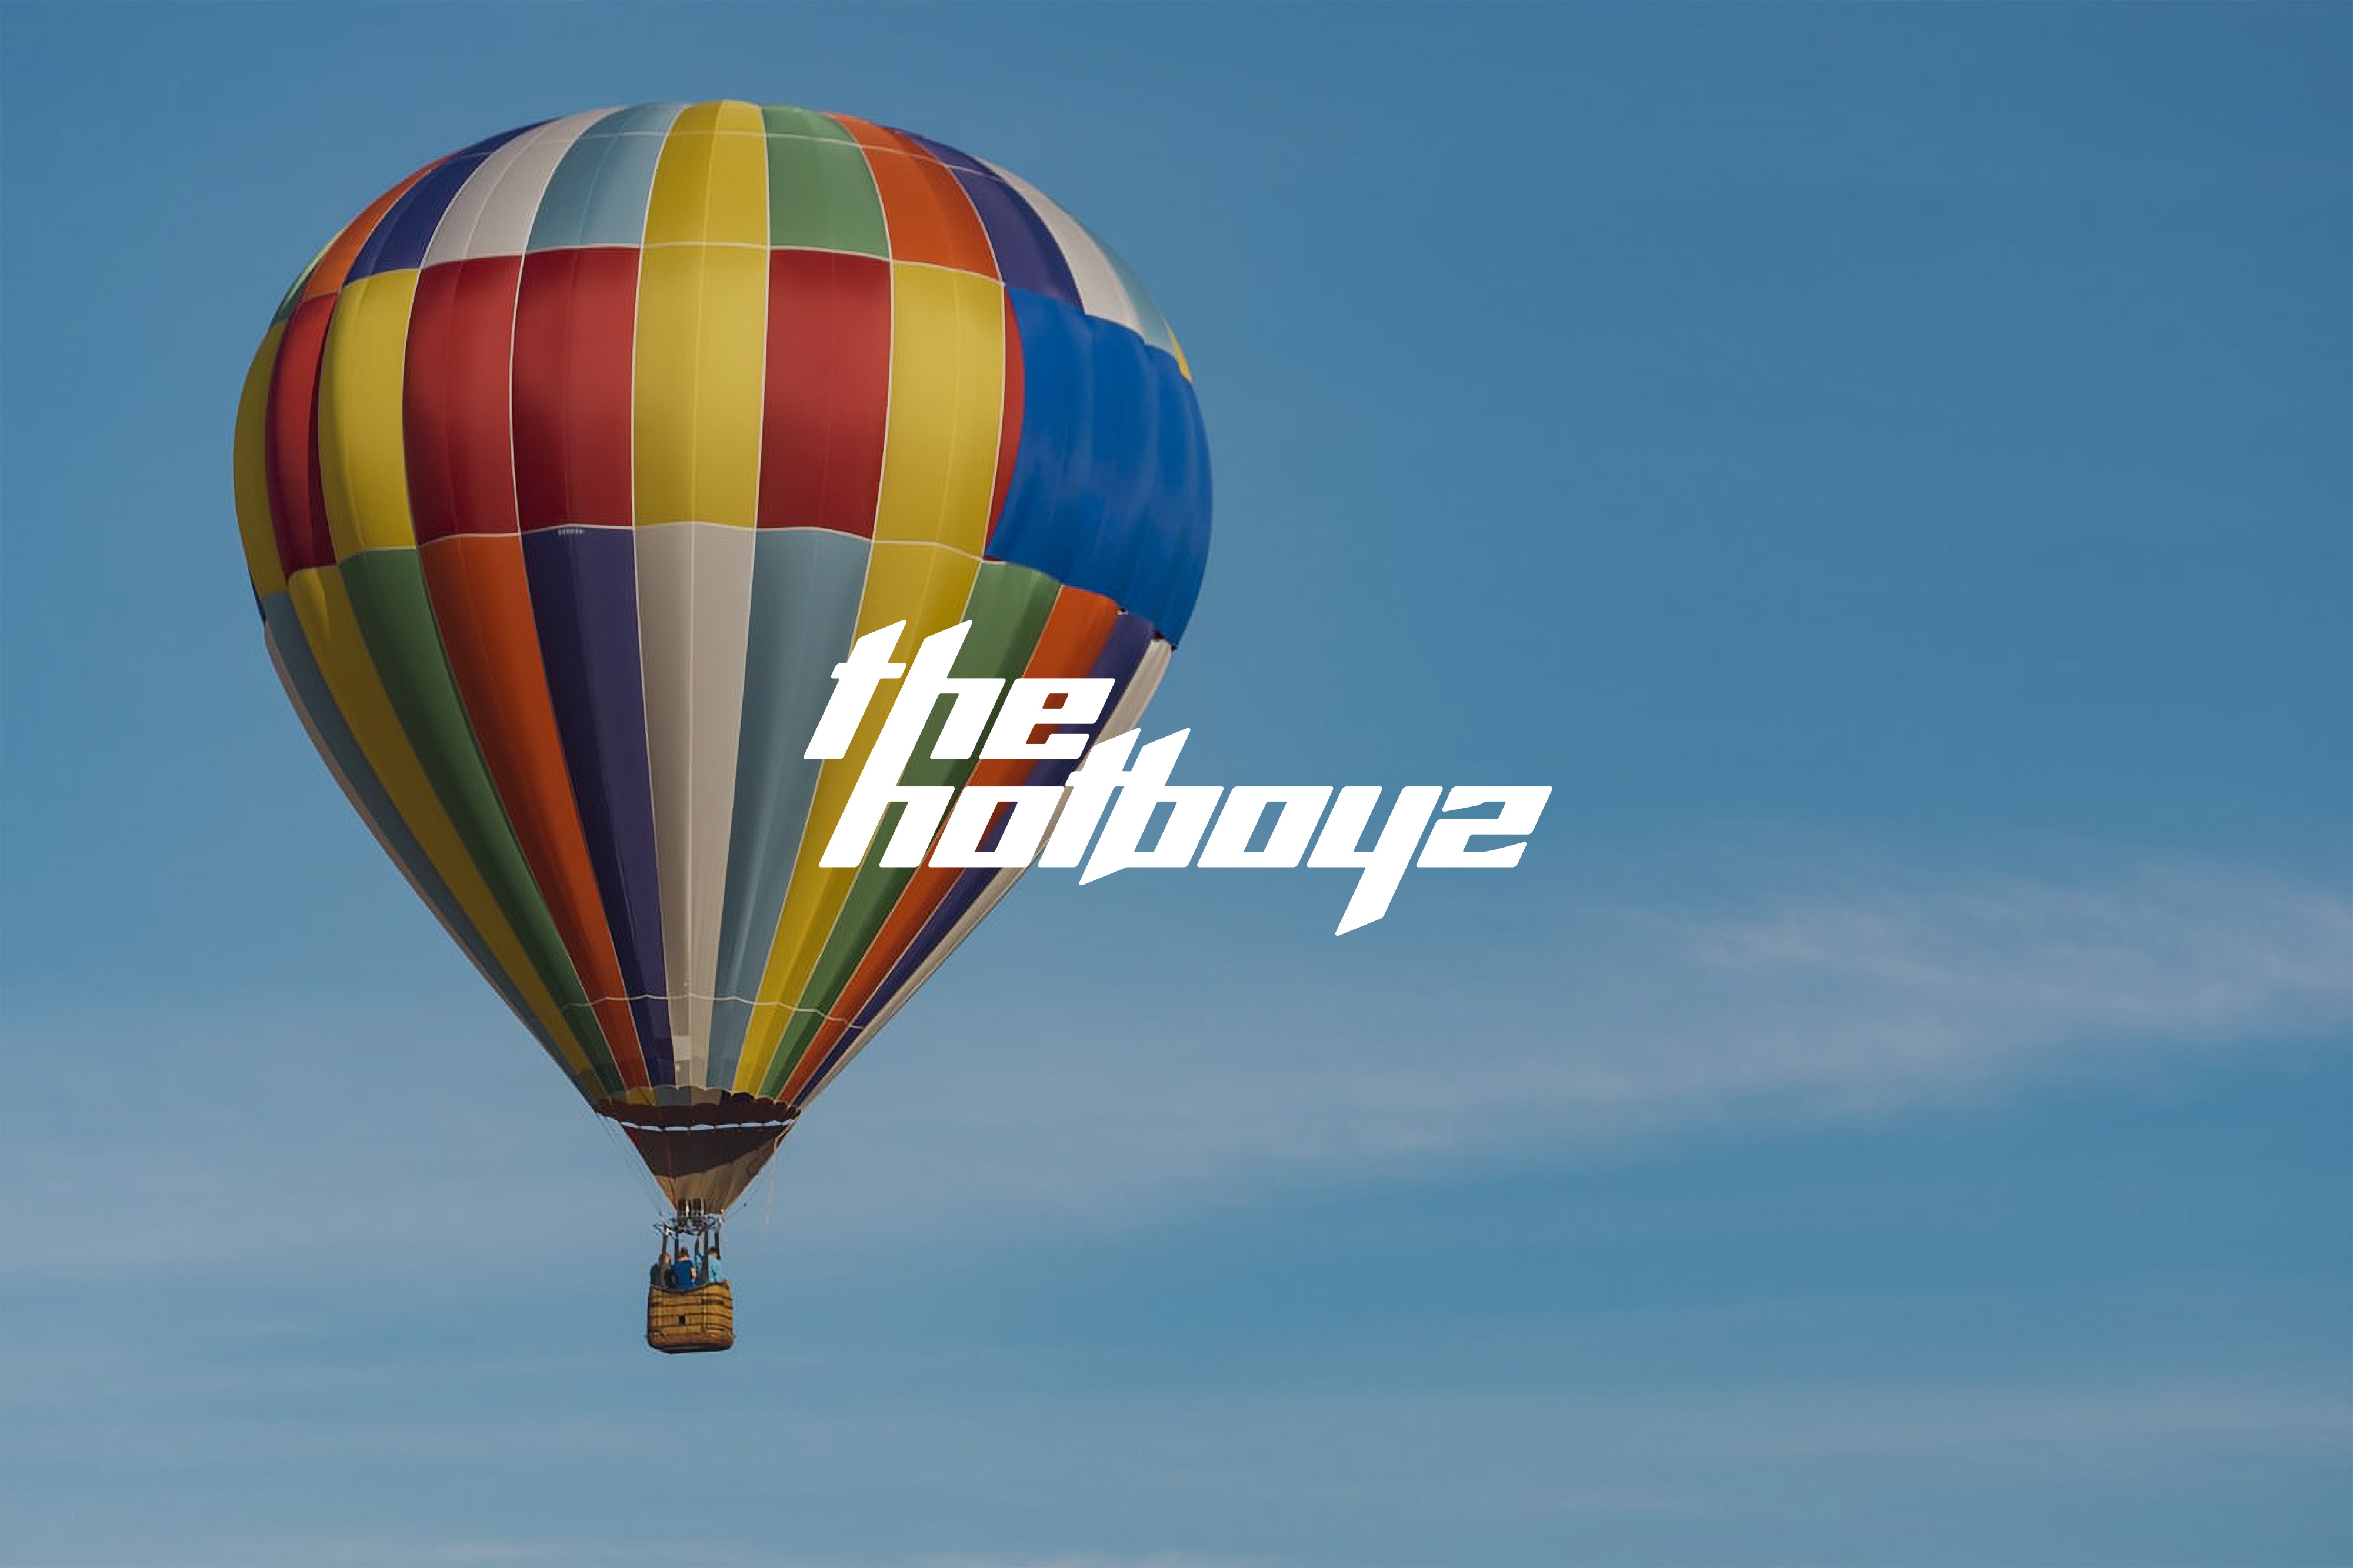 Opening image for the Project of The Hot Boyz, a hot air balloon company